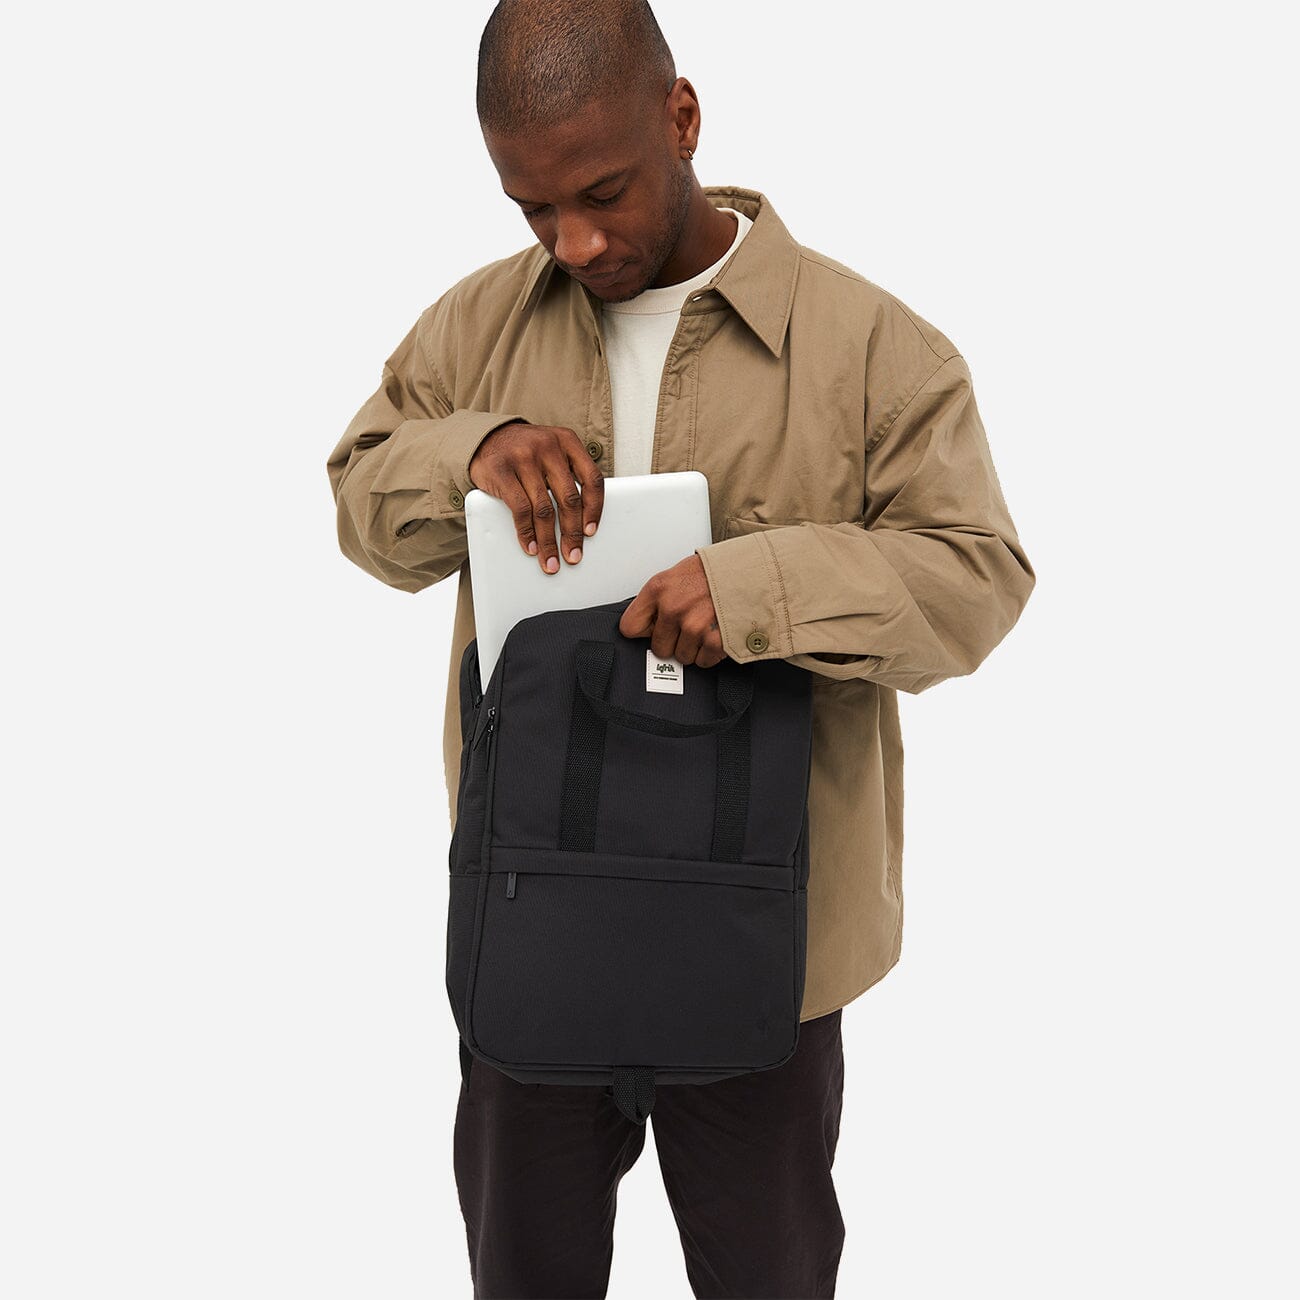 Man from the back storing his laptop in the eco-friendly black backpack